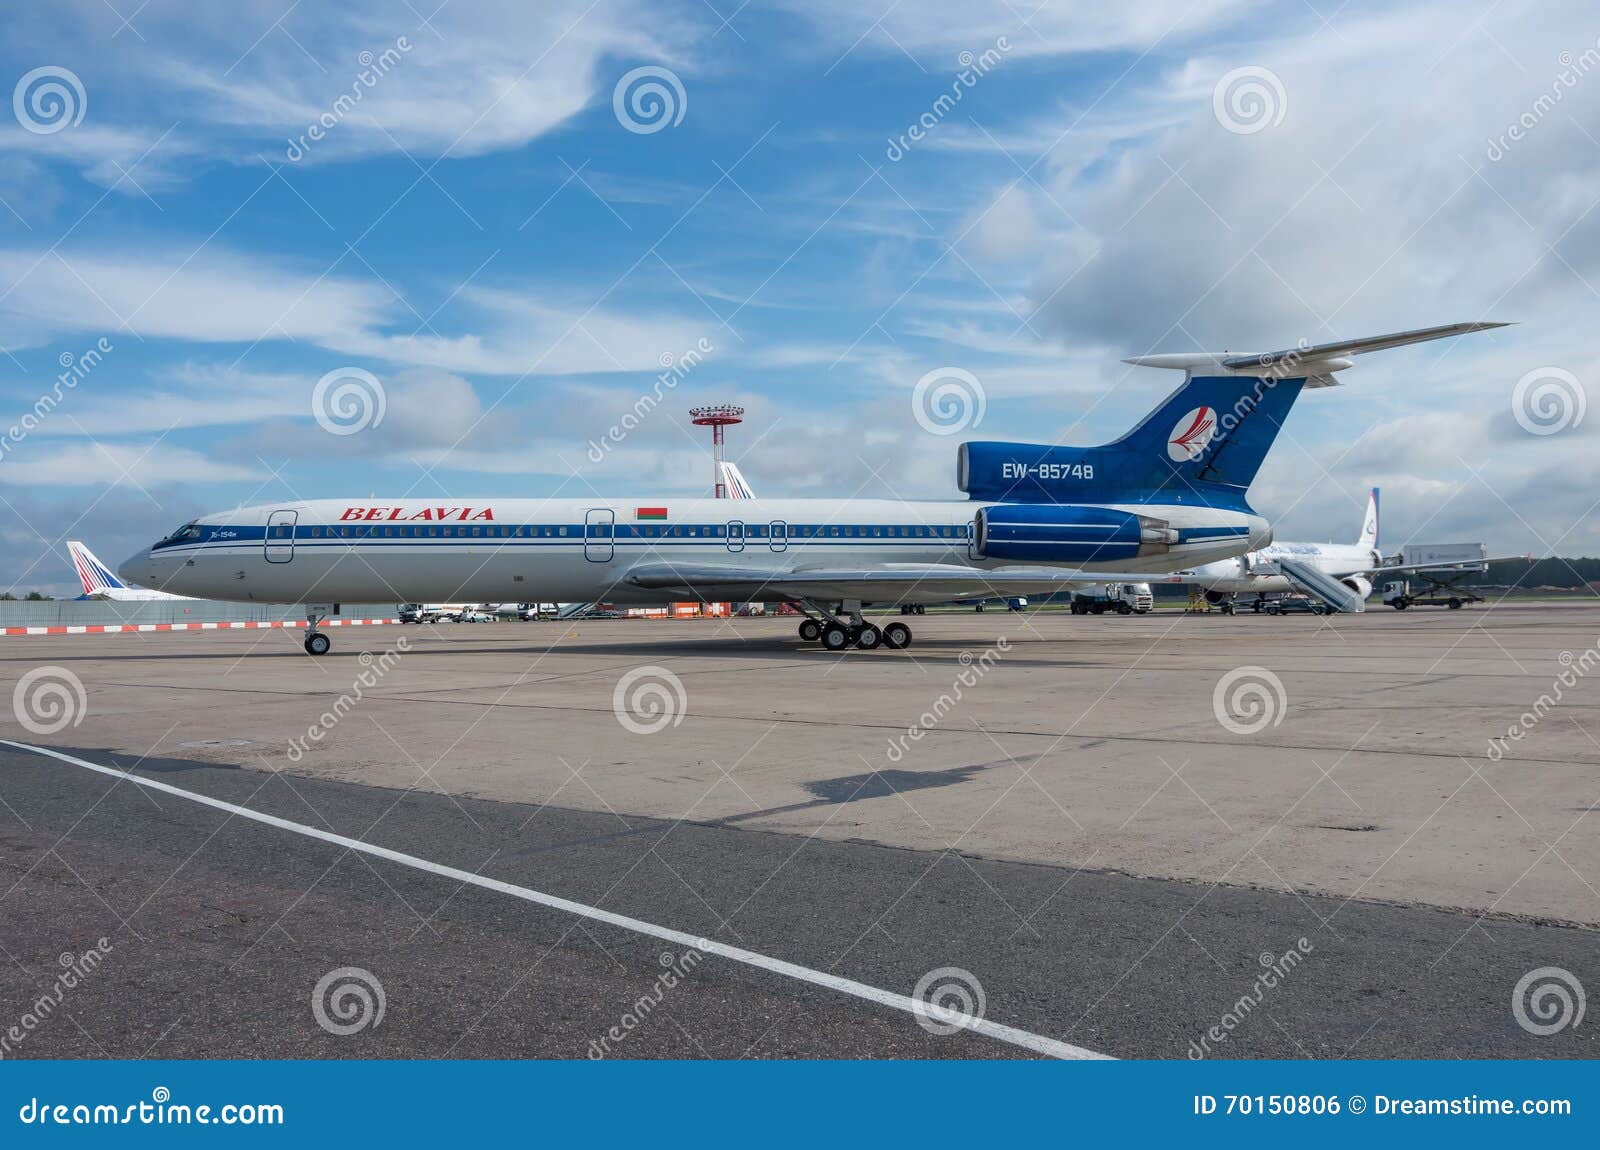 Domodedovo Airport Moscow July 11th 2015 Tupolev Tu